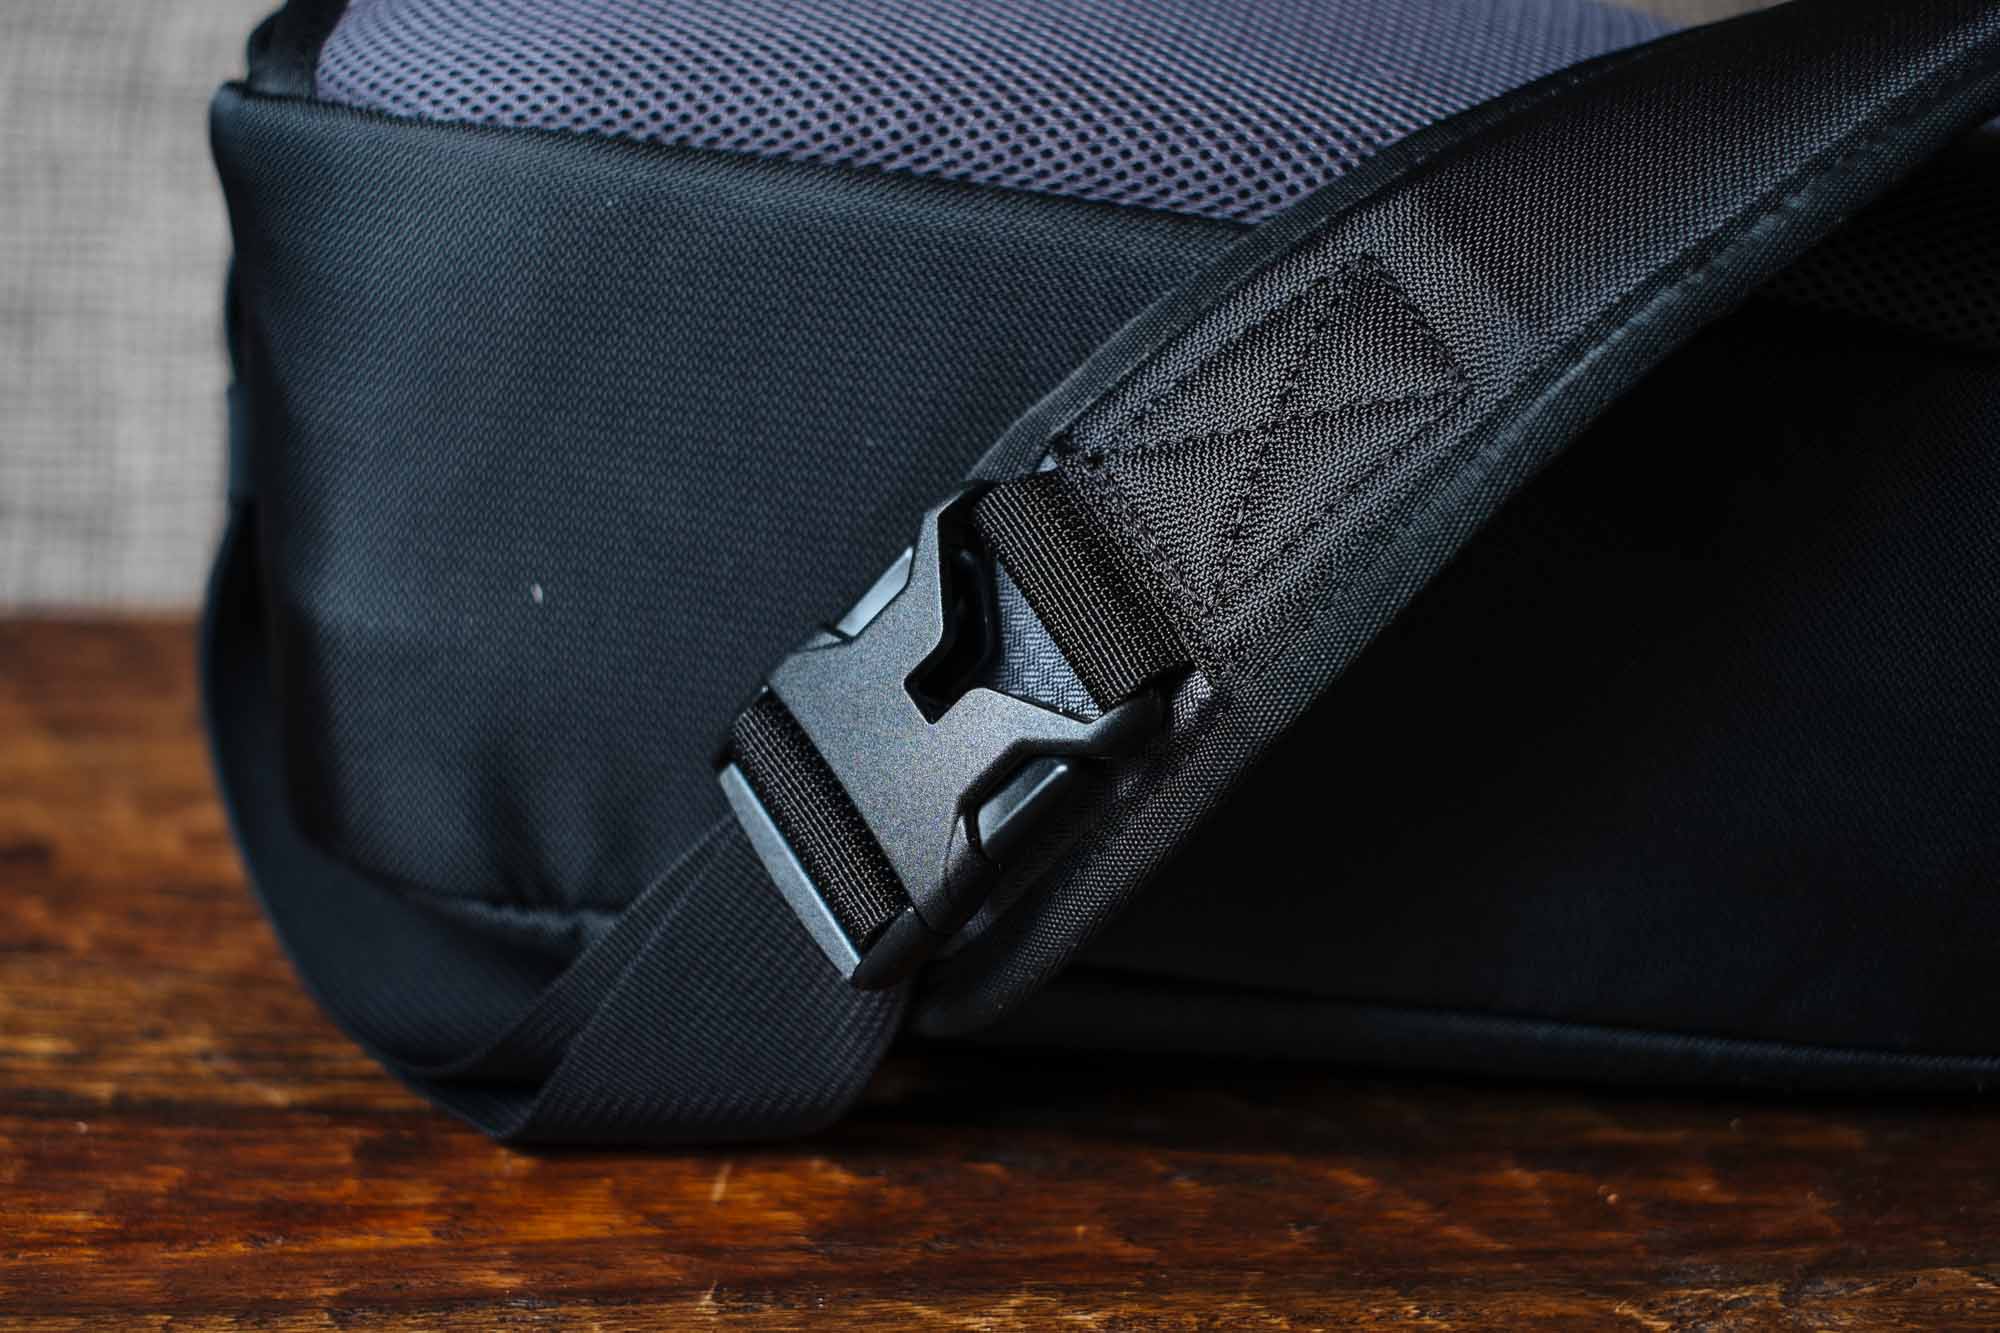 Review: Think Tank Turnstyle 20 Sling Bag - The Phoblographer